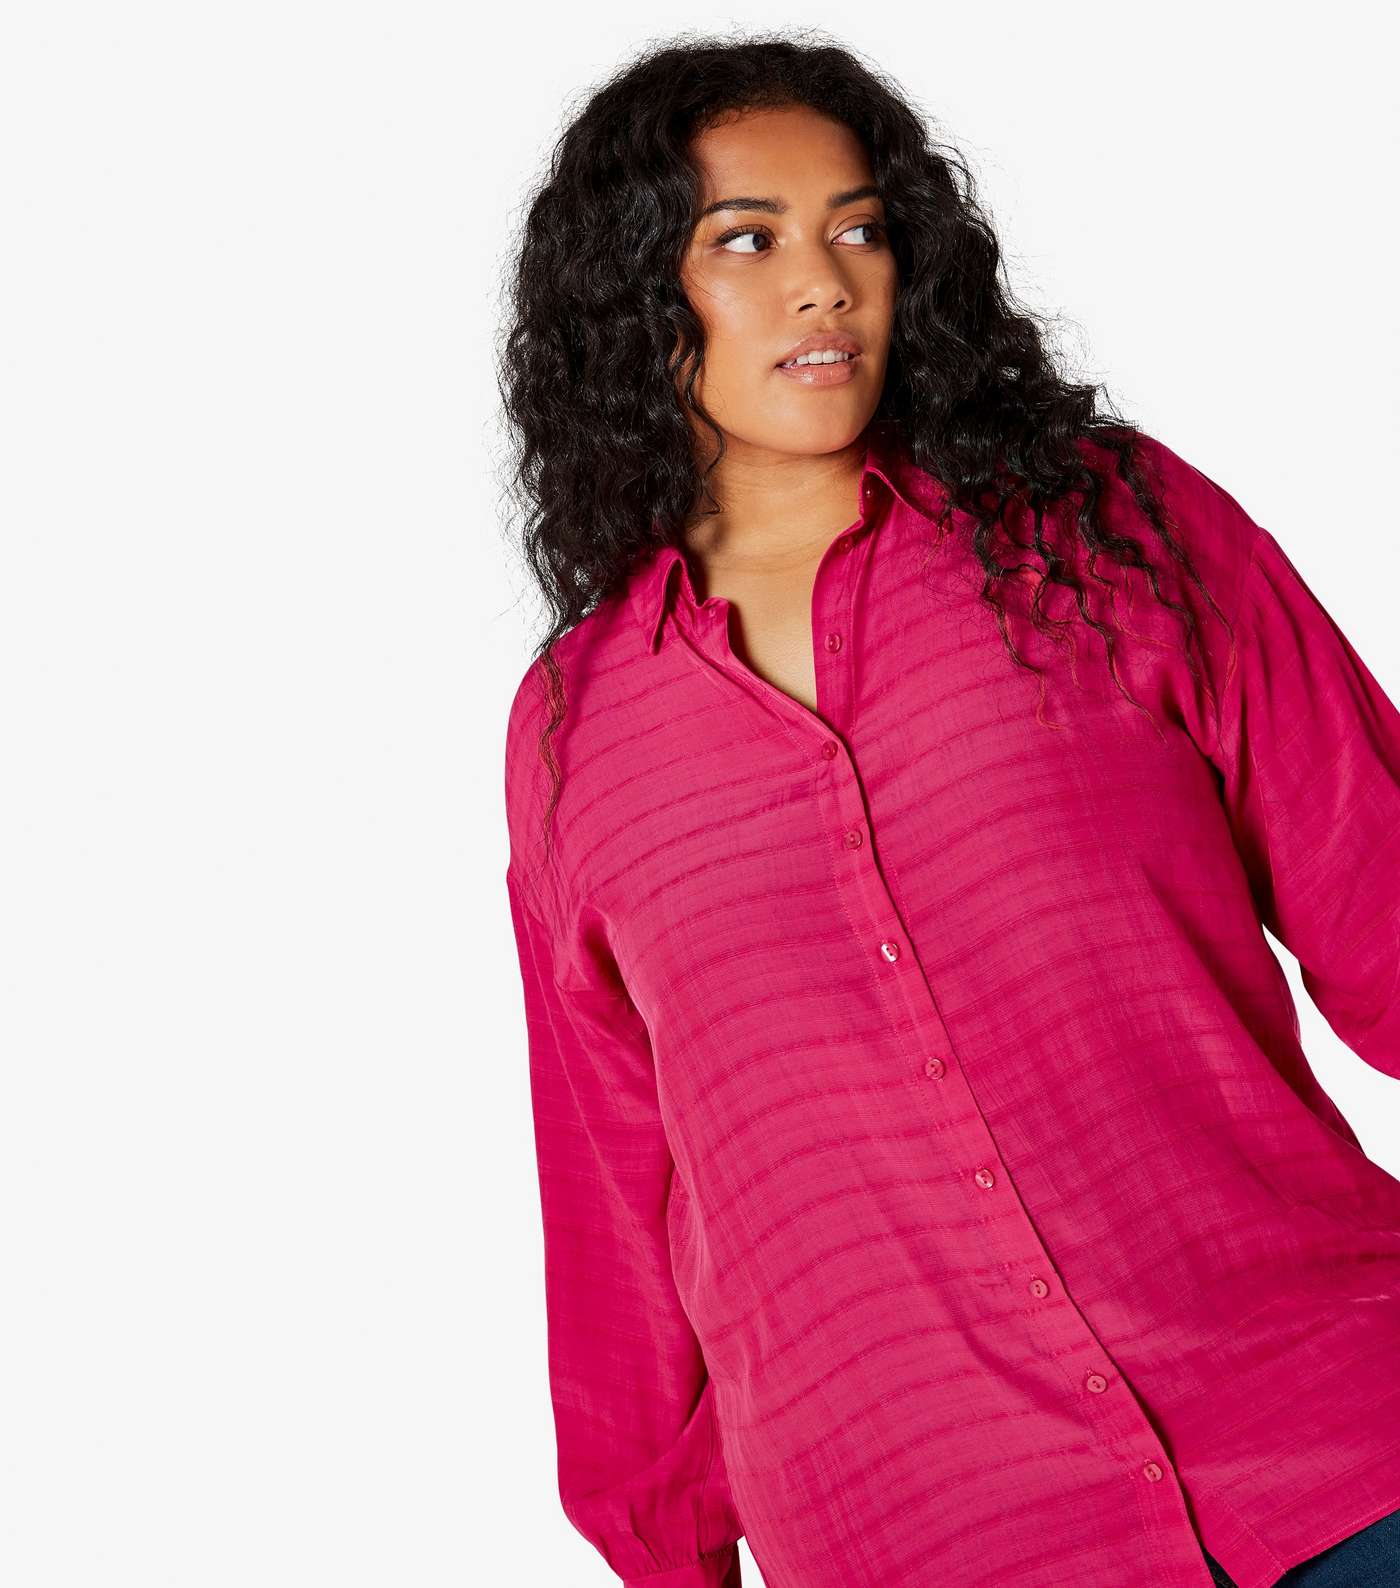 Apricot Curves Bright Pink Check Oversized Shirt Image 4